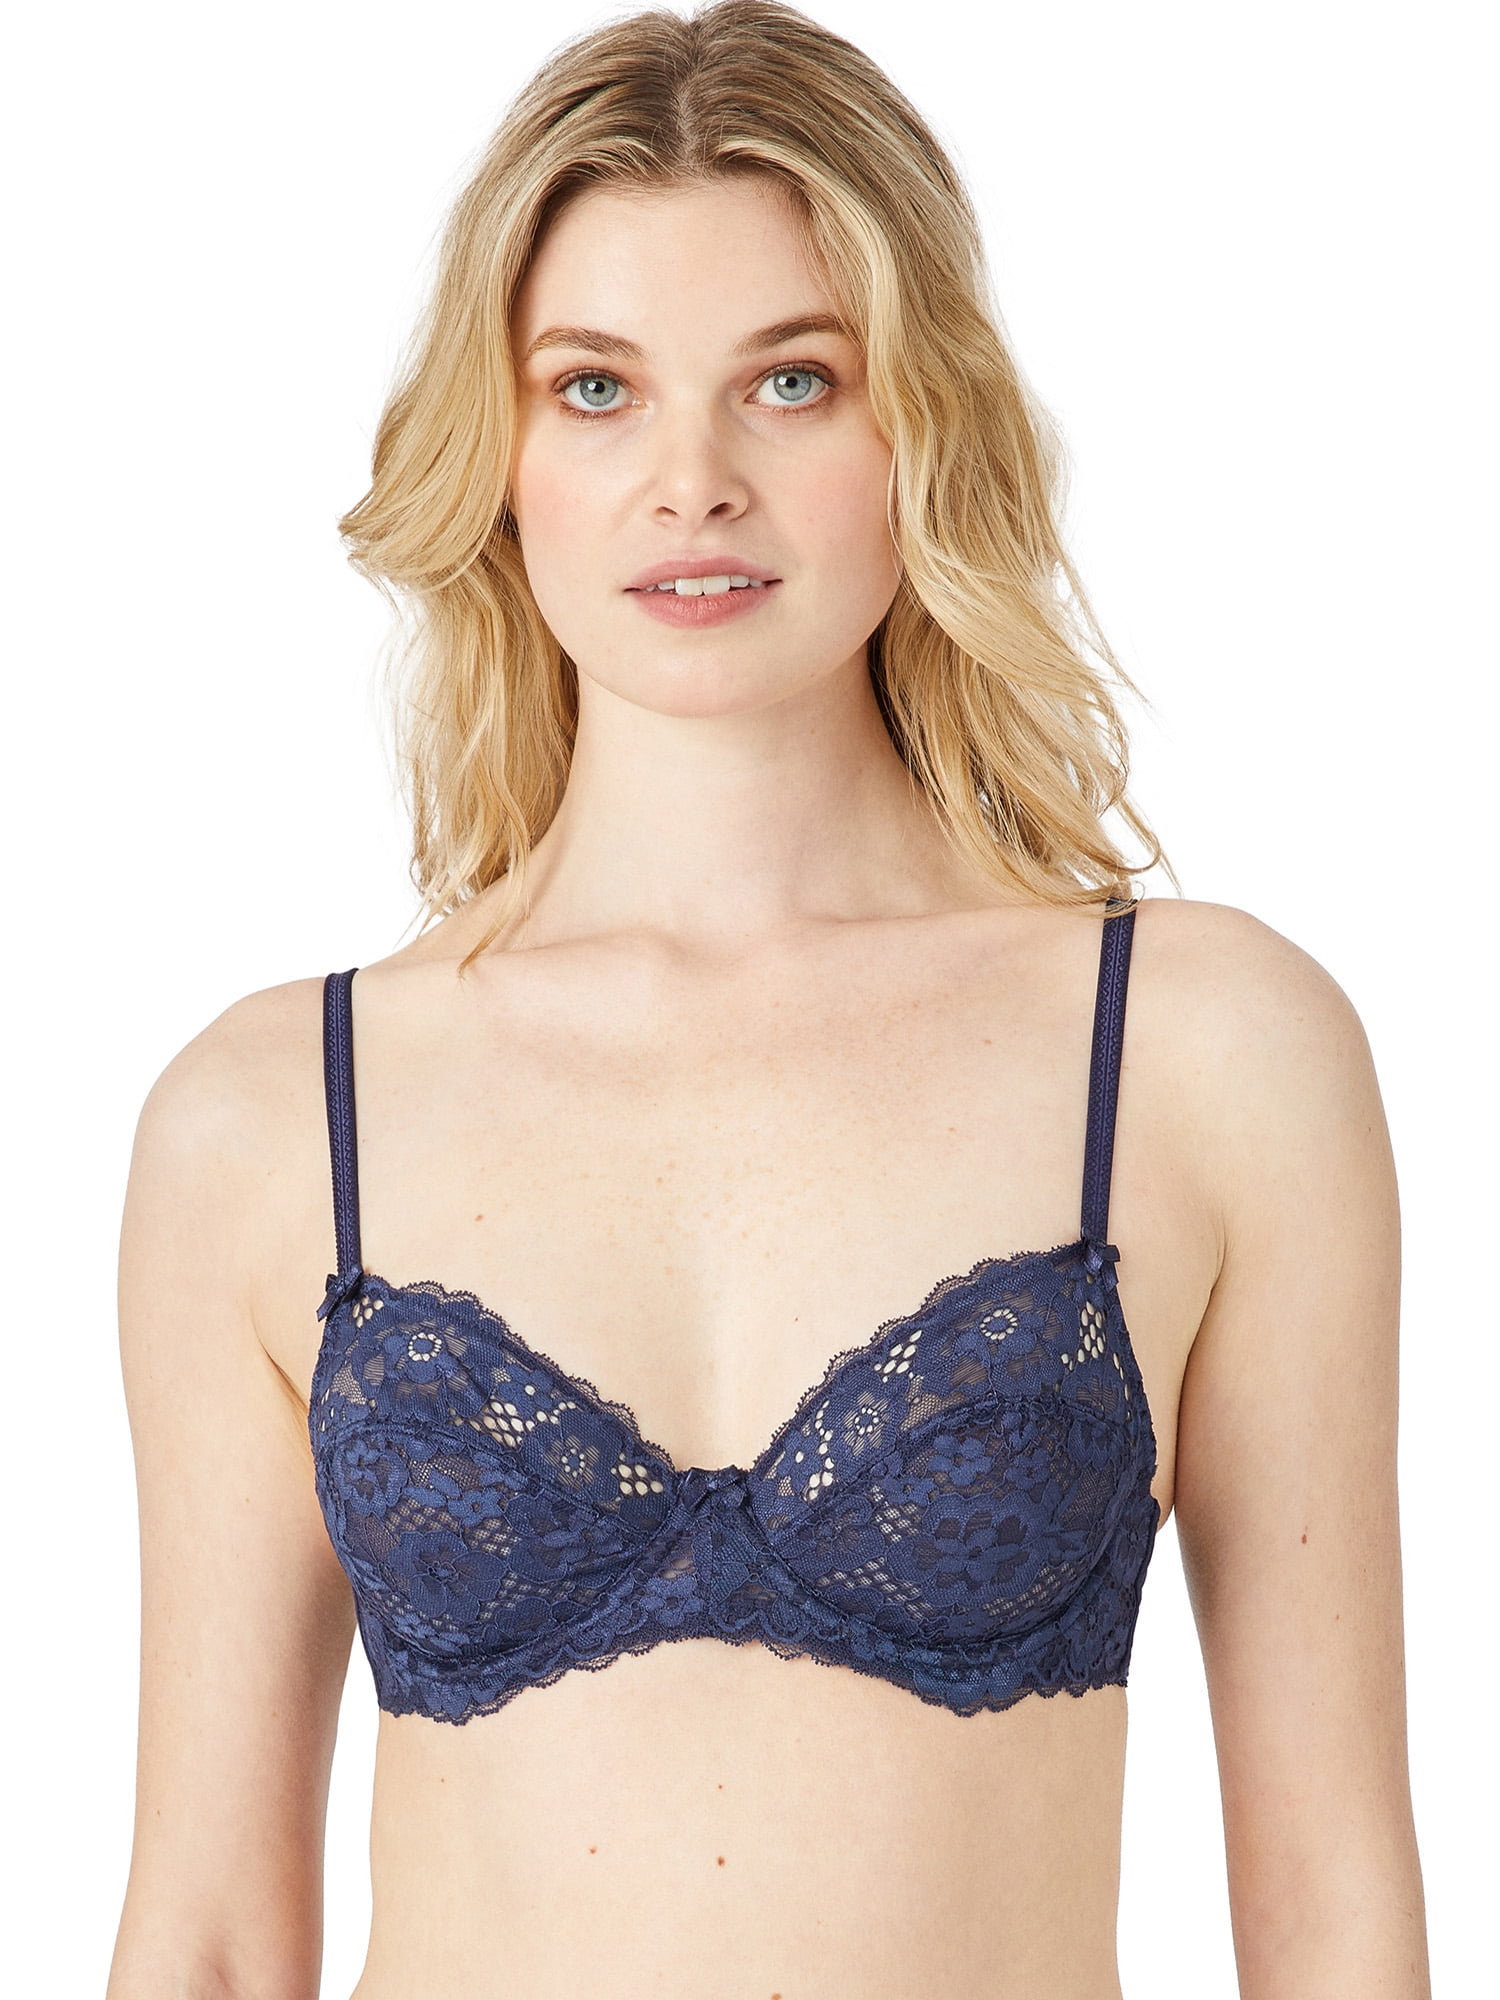 Adored by Adore Me Women’s Payal Longline Underwire Floral Lace Demi Cup Bra